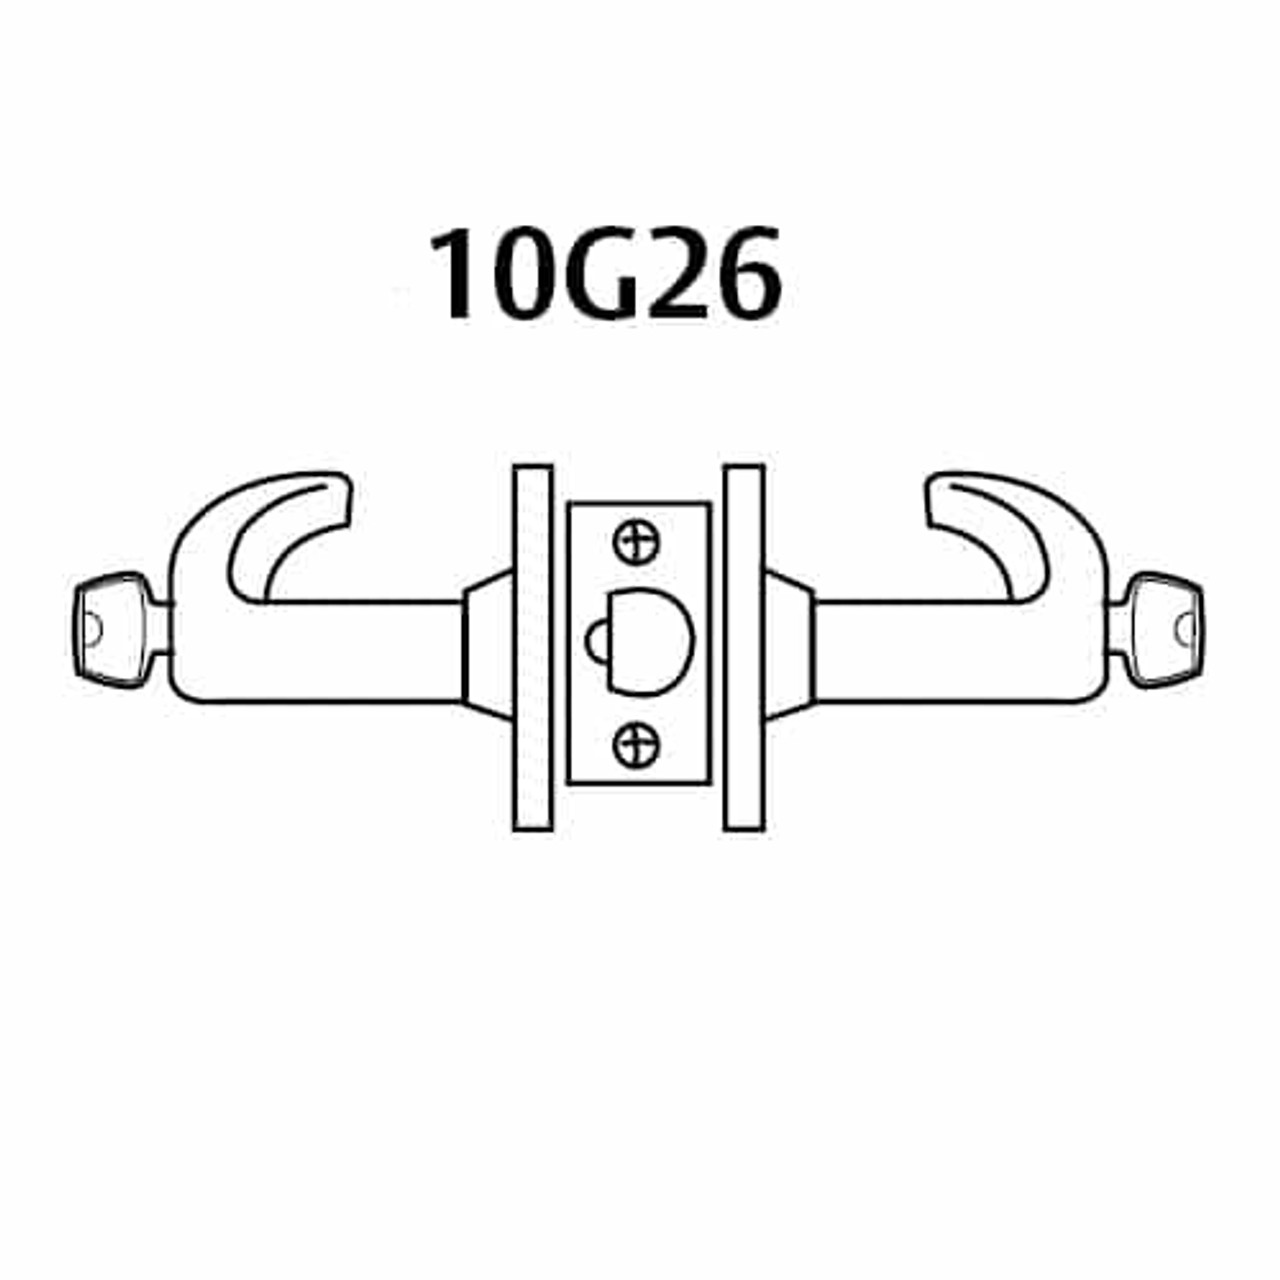 2860-10G26-LB-26D Sargent 10 Line Cylindrical Storeroom Locks with B Lever Design and L Rose Prepped for LFIC in Satin Chrome